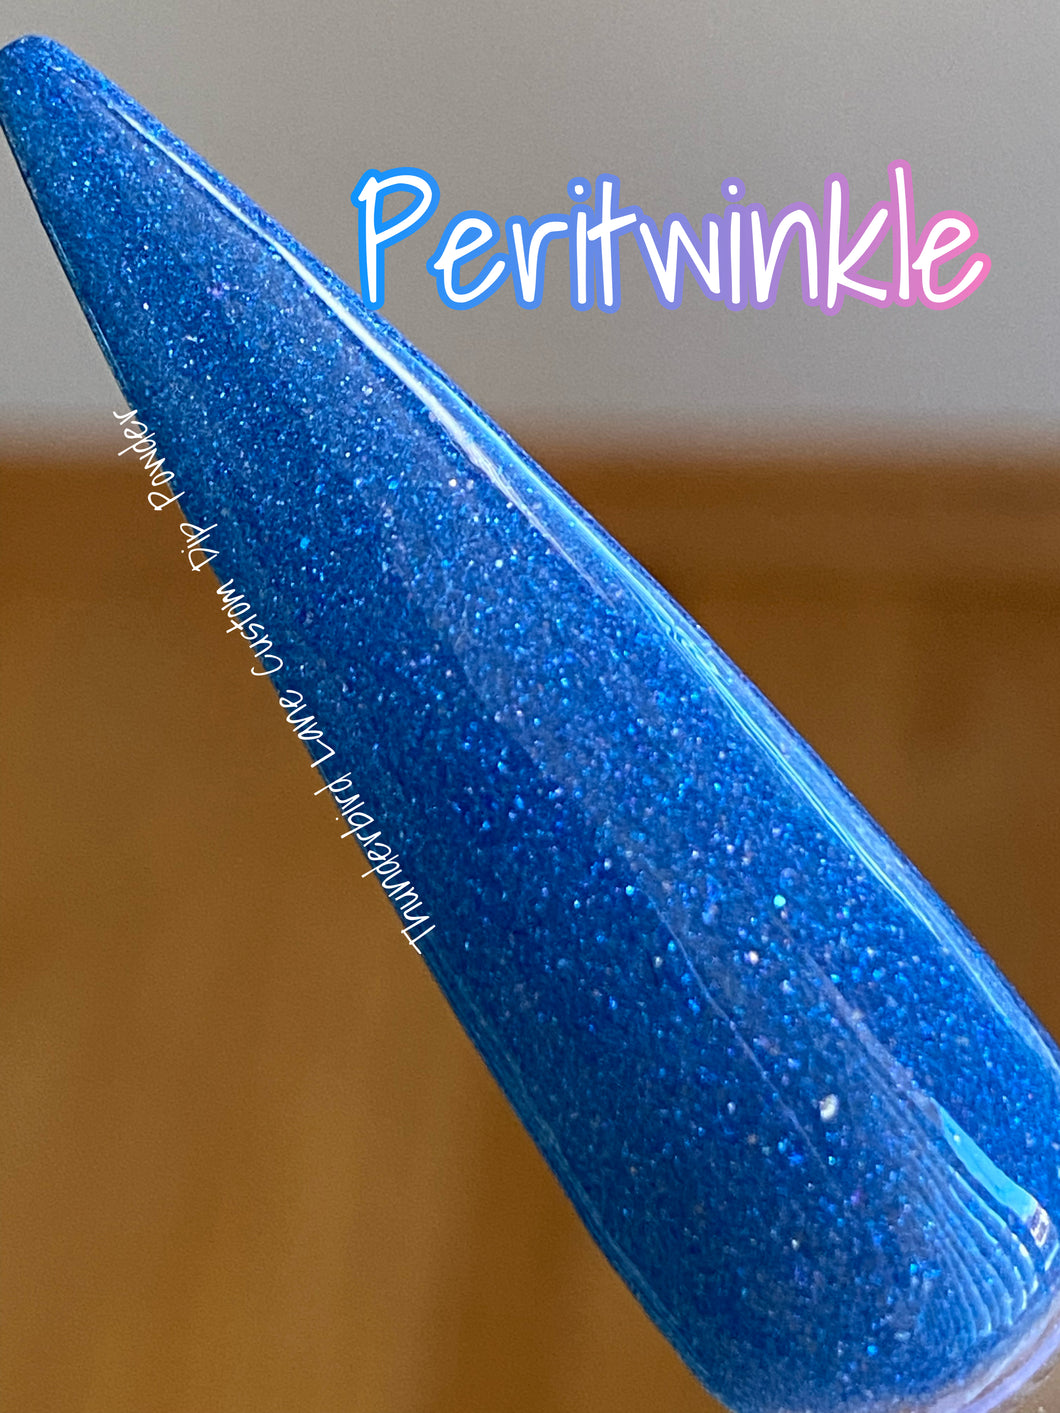 Peritwinkle